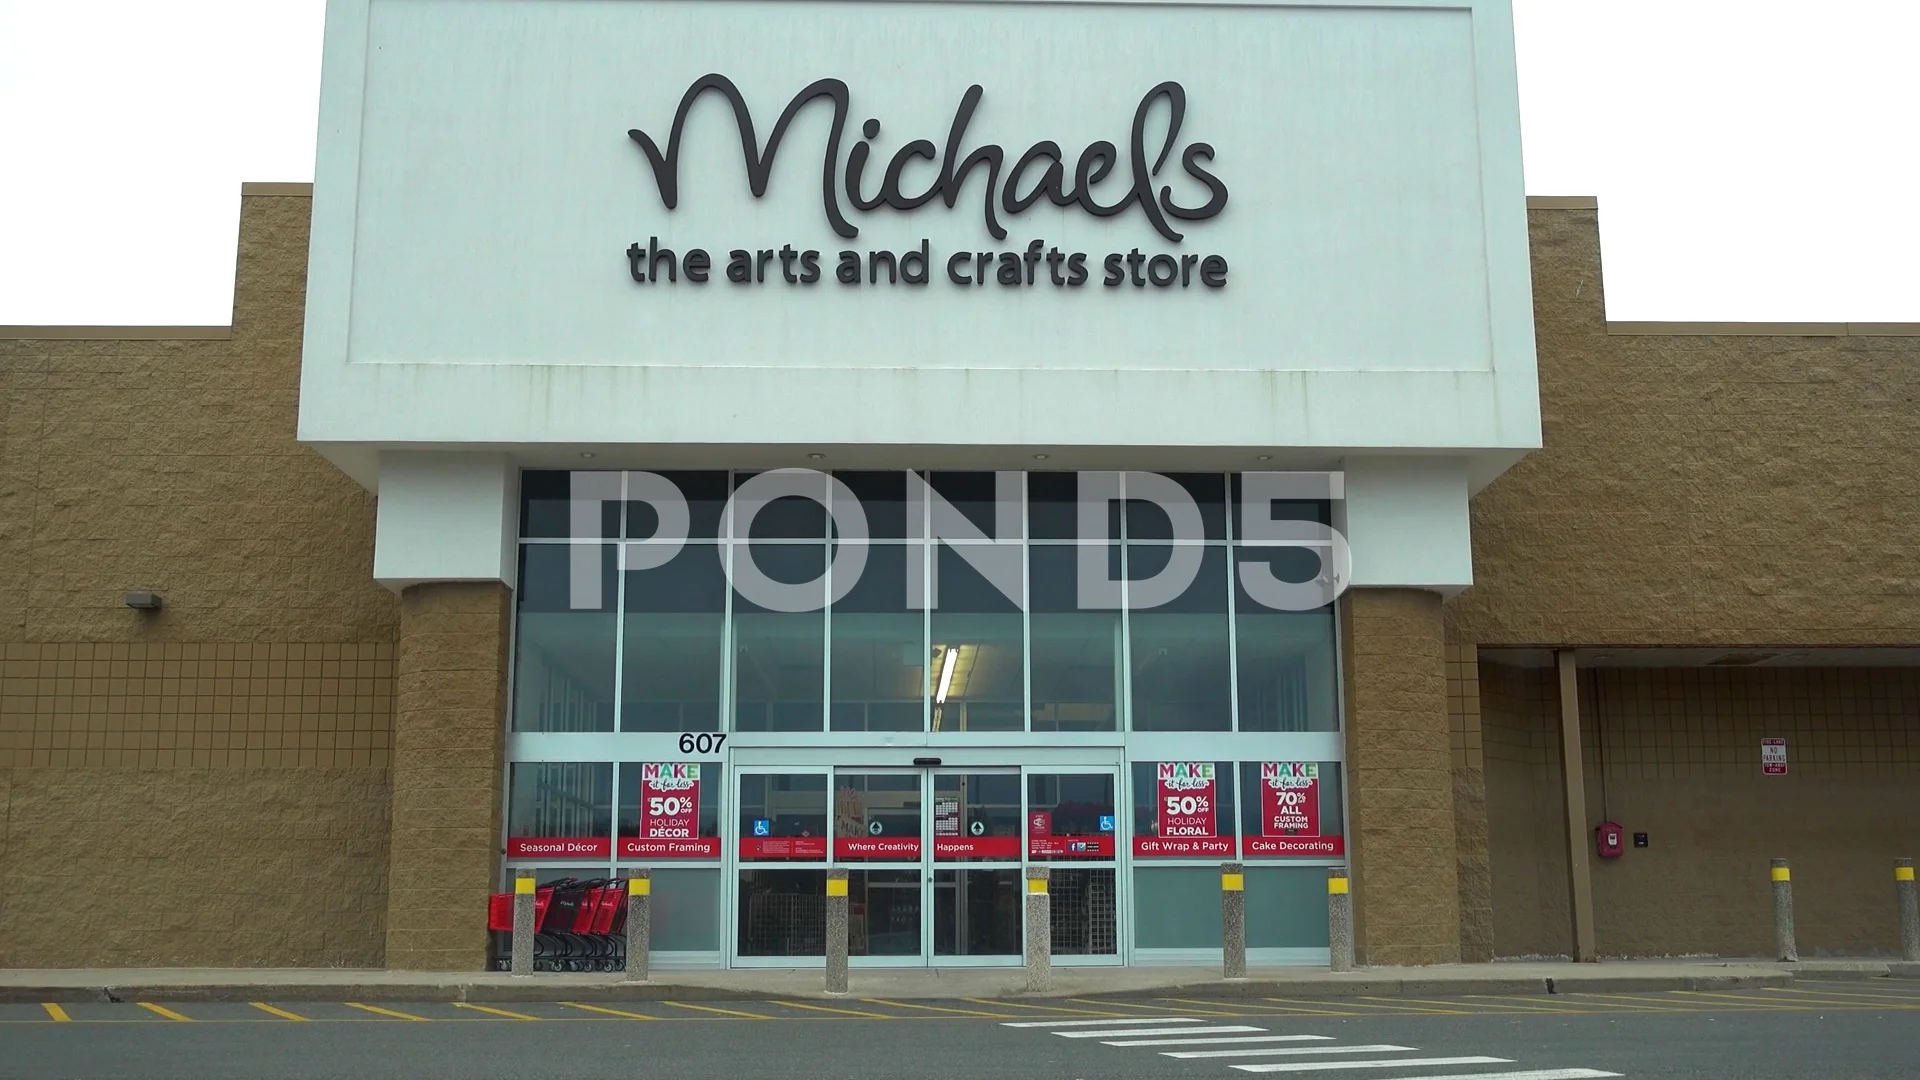 Michaels Arts and Crafts storefront driv, Stock Video